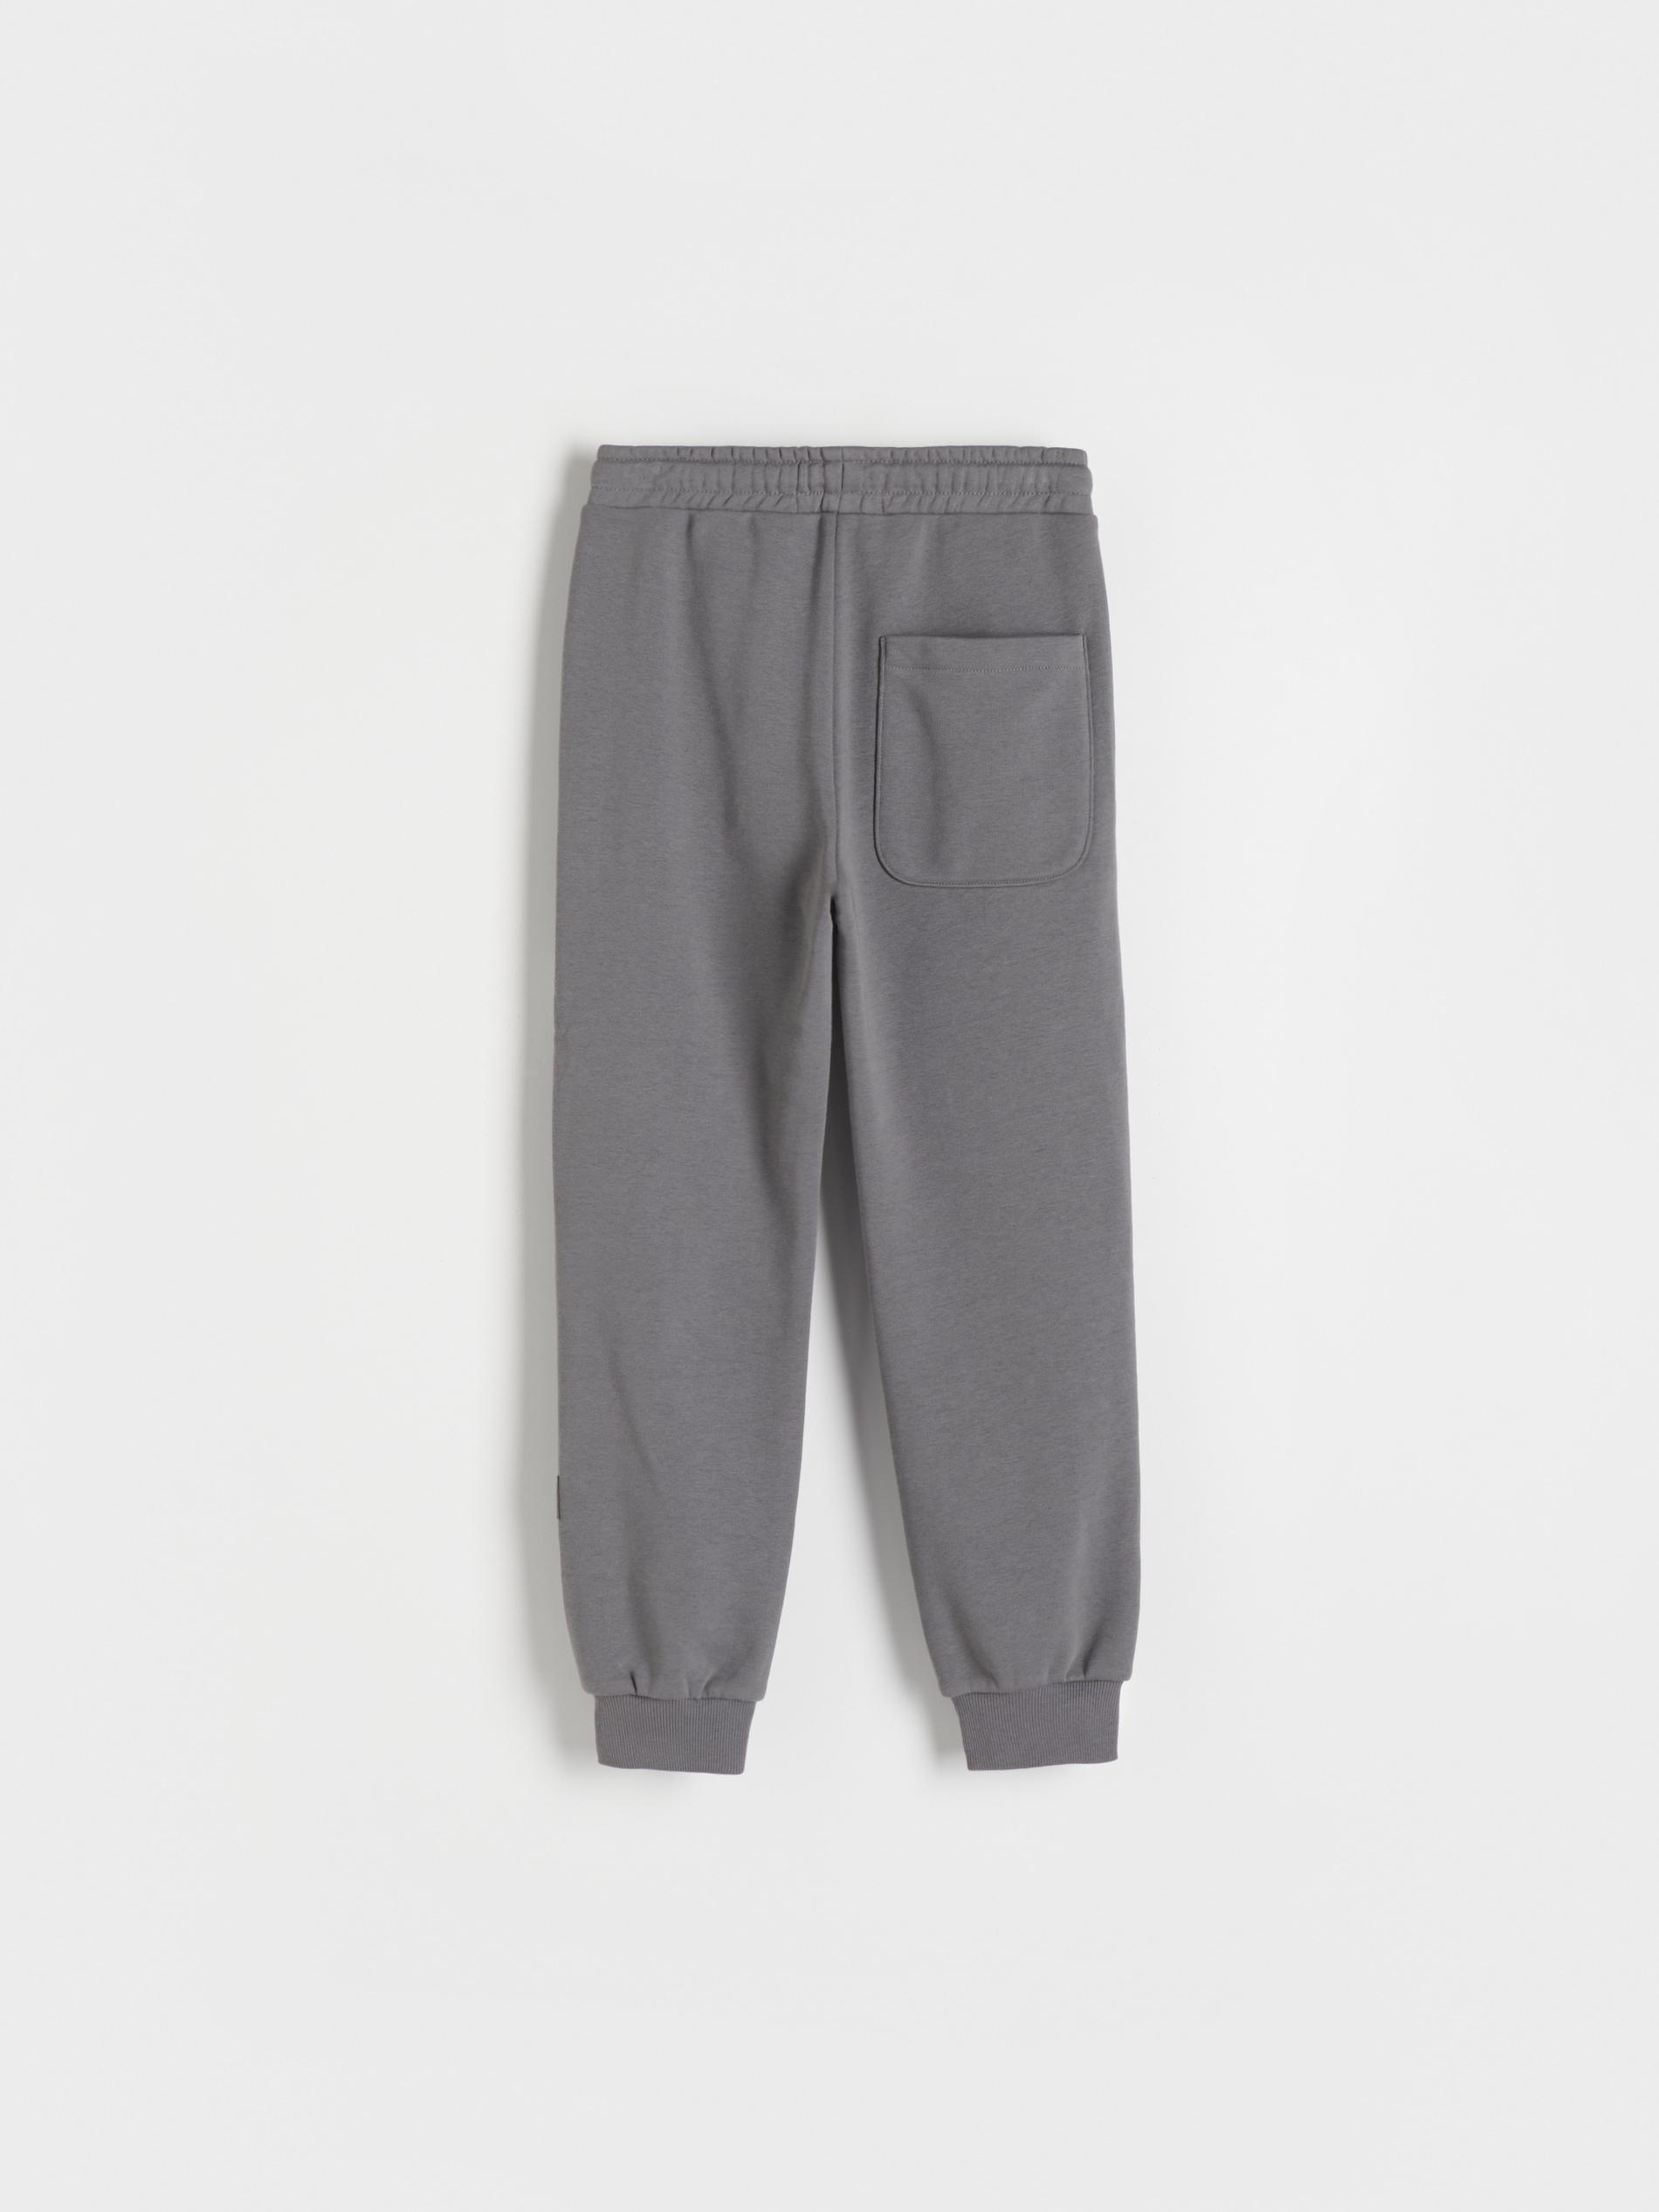 Reserved - Grey Cotton Joggers, Kids Boys